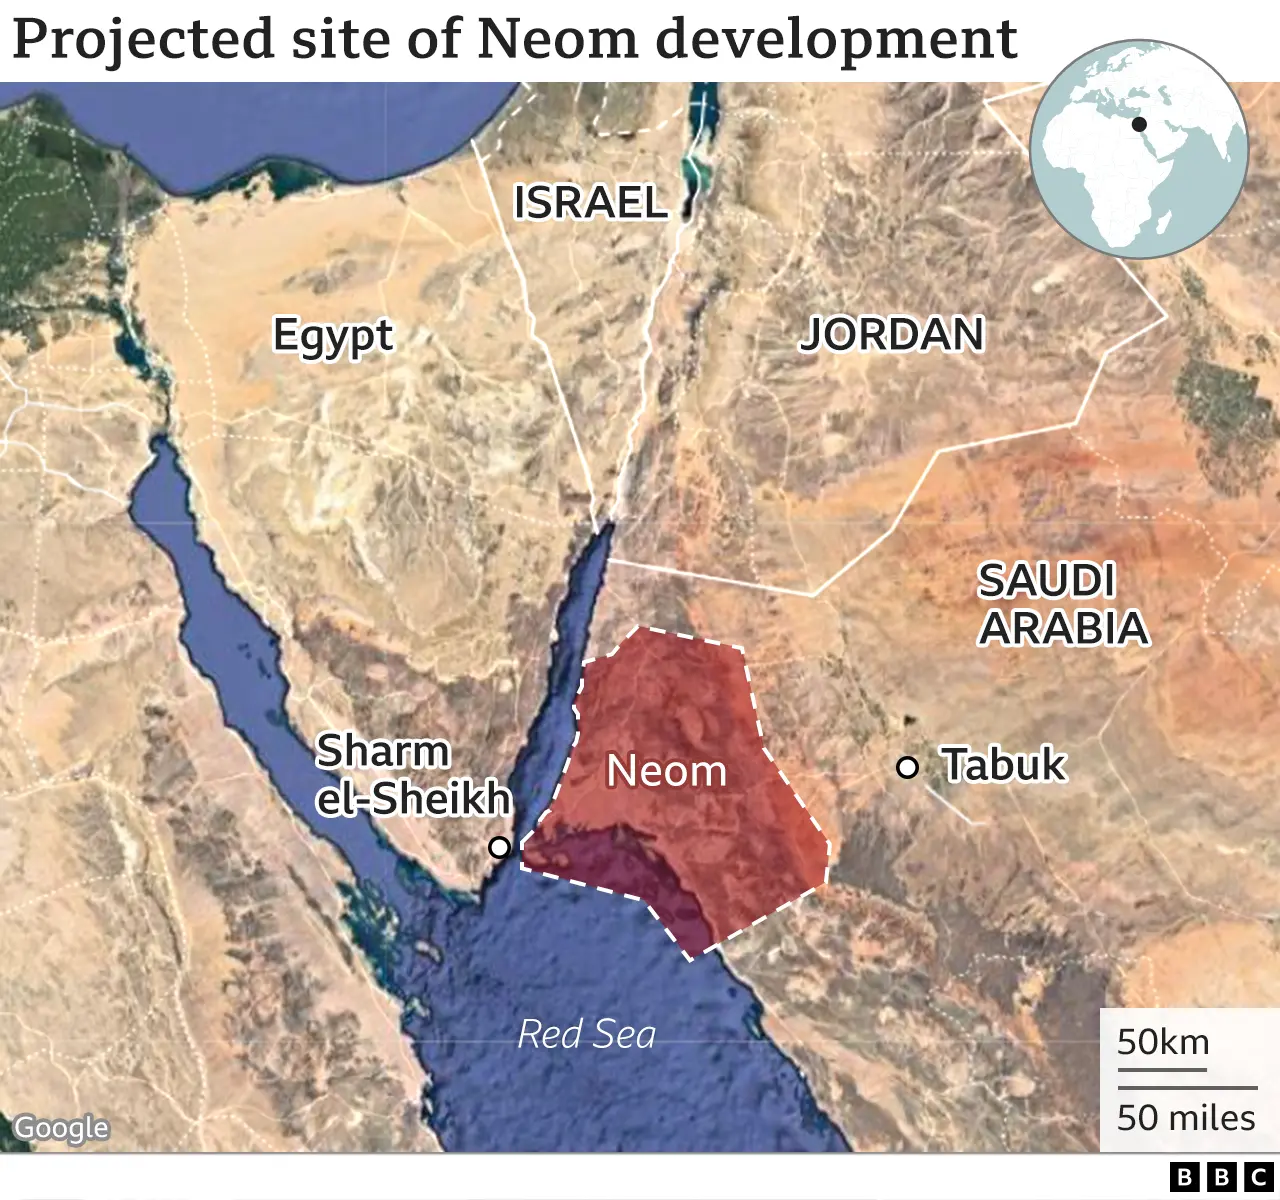 https://ichef.bbci.co.uk/news/976/cpsprodpb/142A8/production/_122300628_neom_project_2x640-nc.png.webp